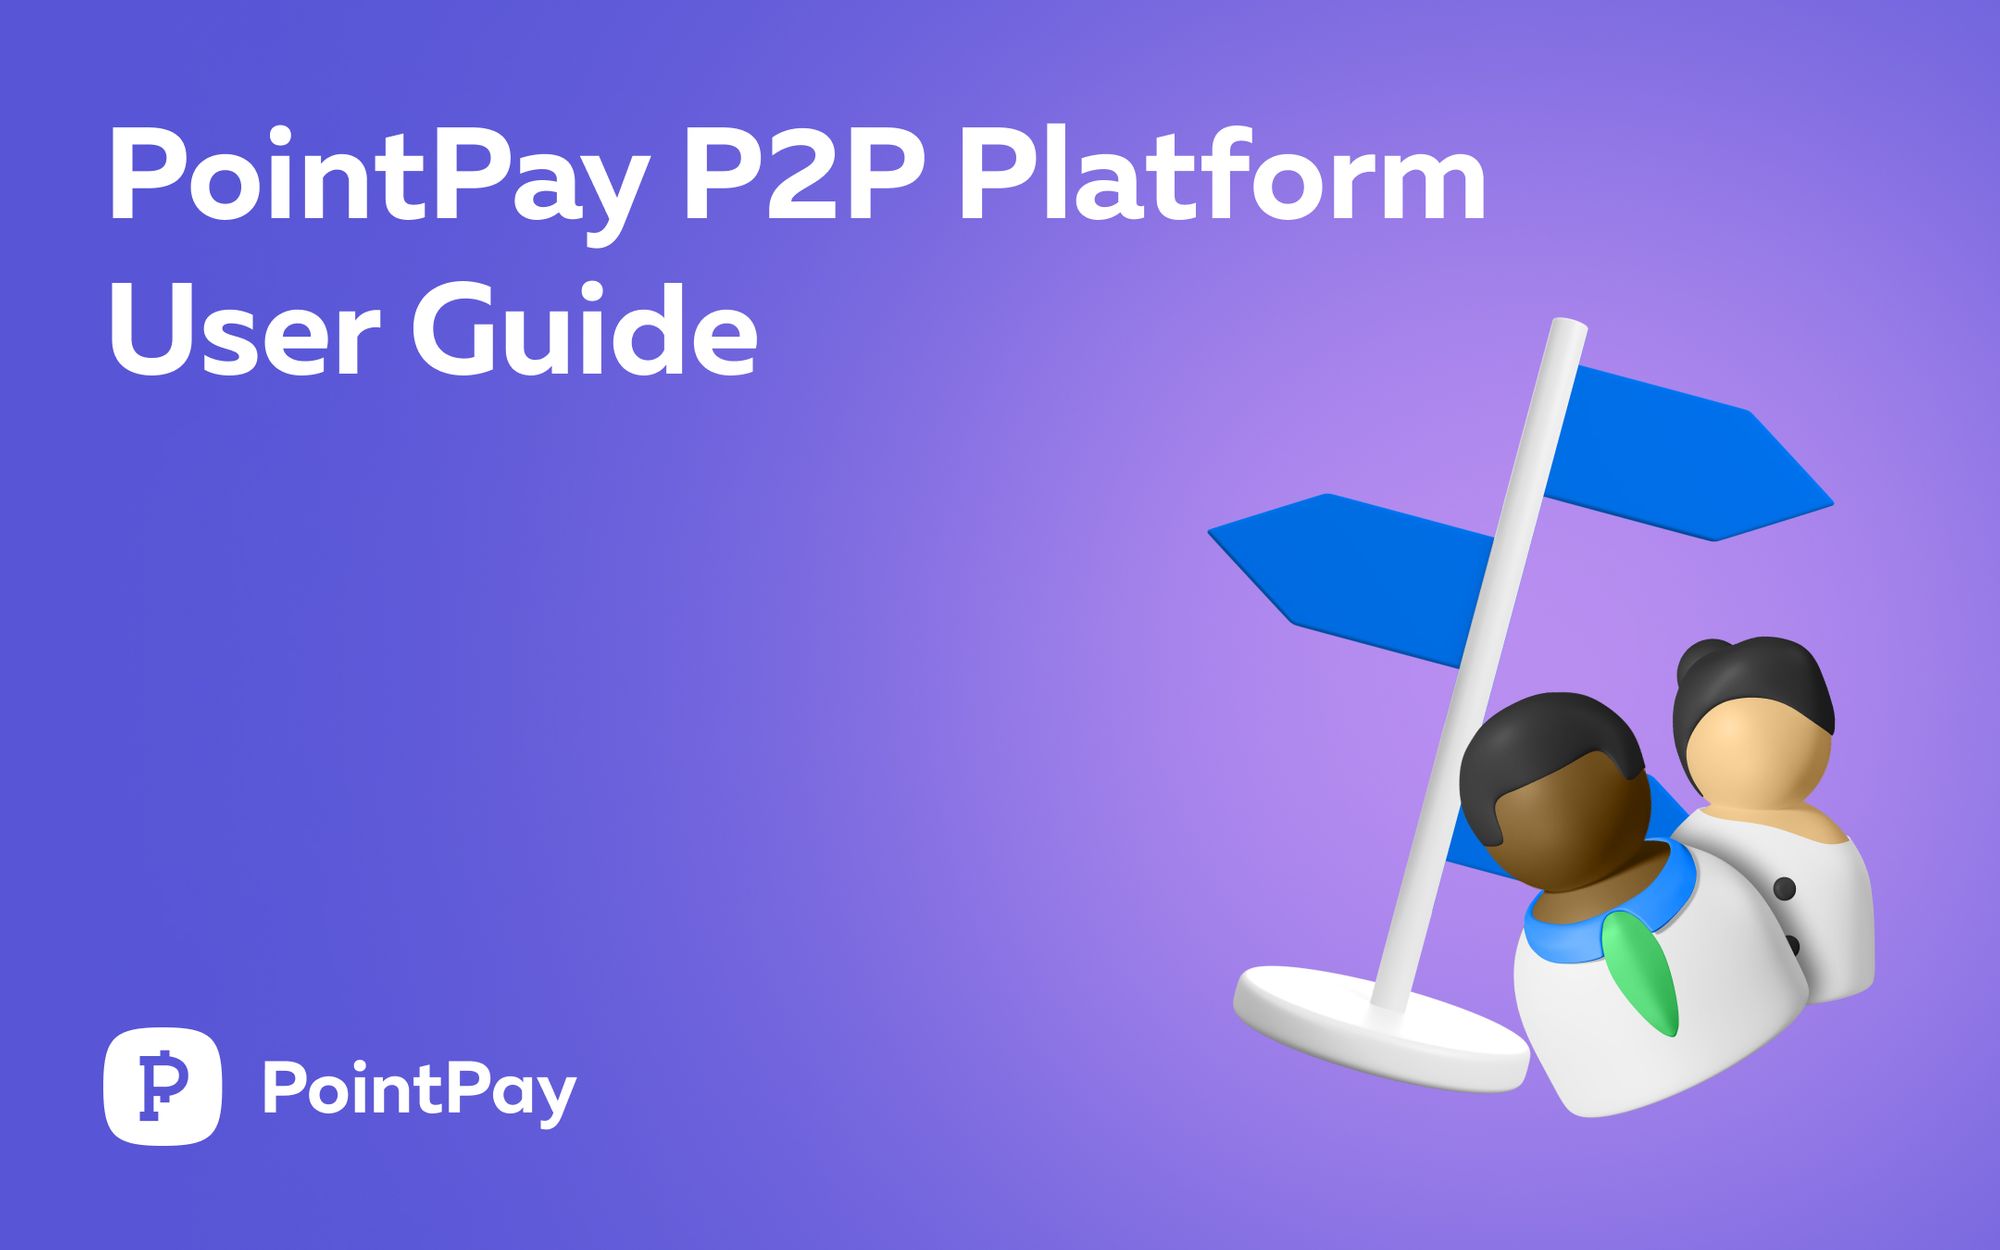 Complete guide to the PointPay P2P Platform